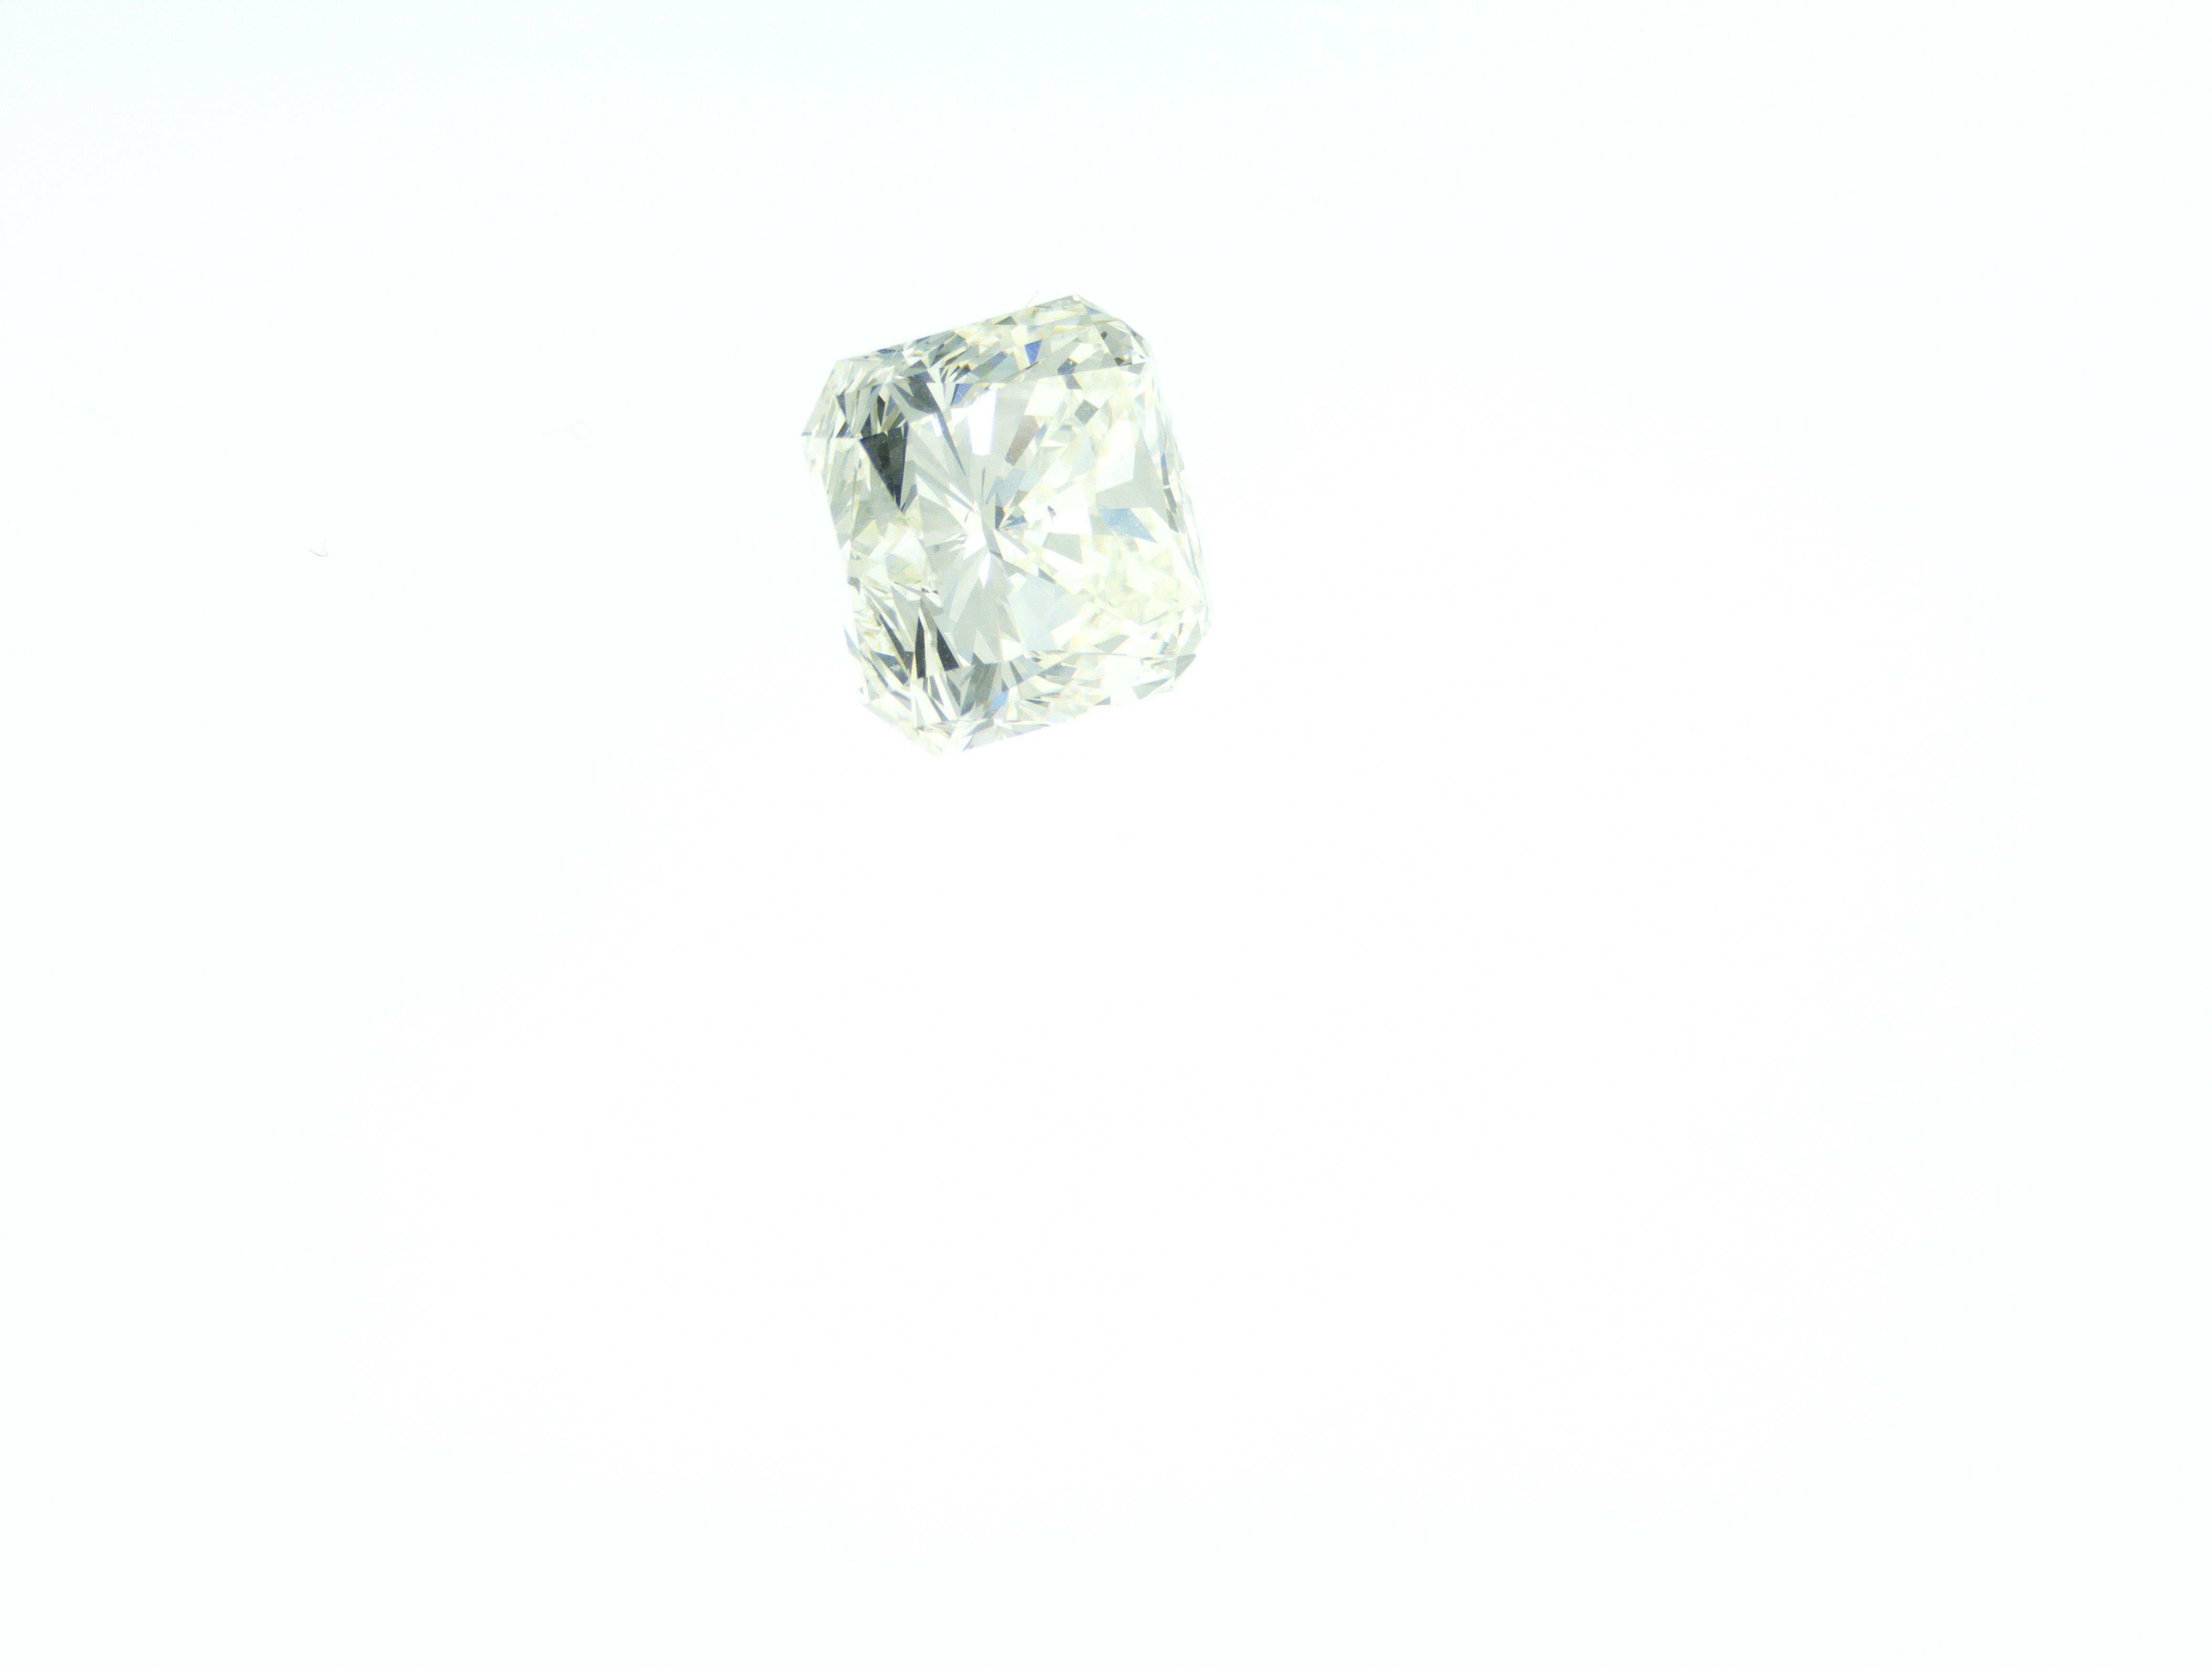 Natural Diamond colour J, clarity SI1, certified by HRDAntwerp, weight 4.05 carat. Natural diamonds are unique gem. Creation of natural diamonds accounts millions of years and they were delivered to nowadays known deposits by special volcanos from